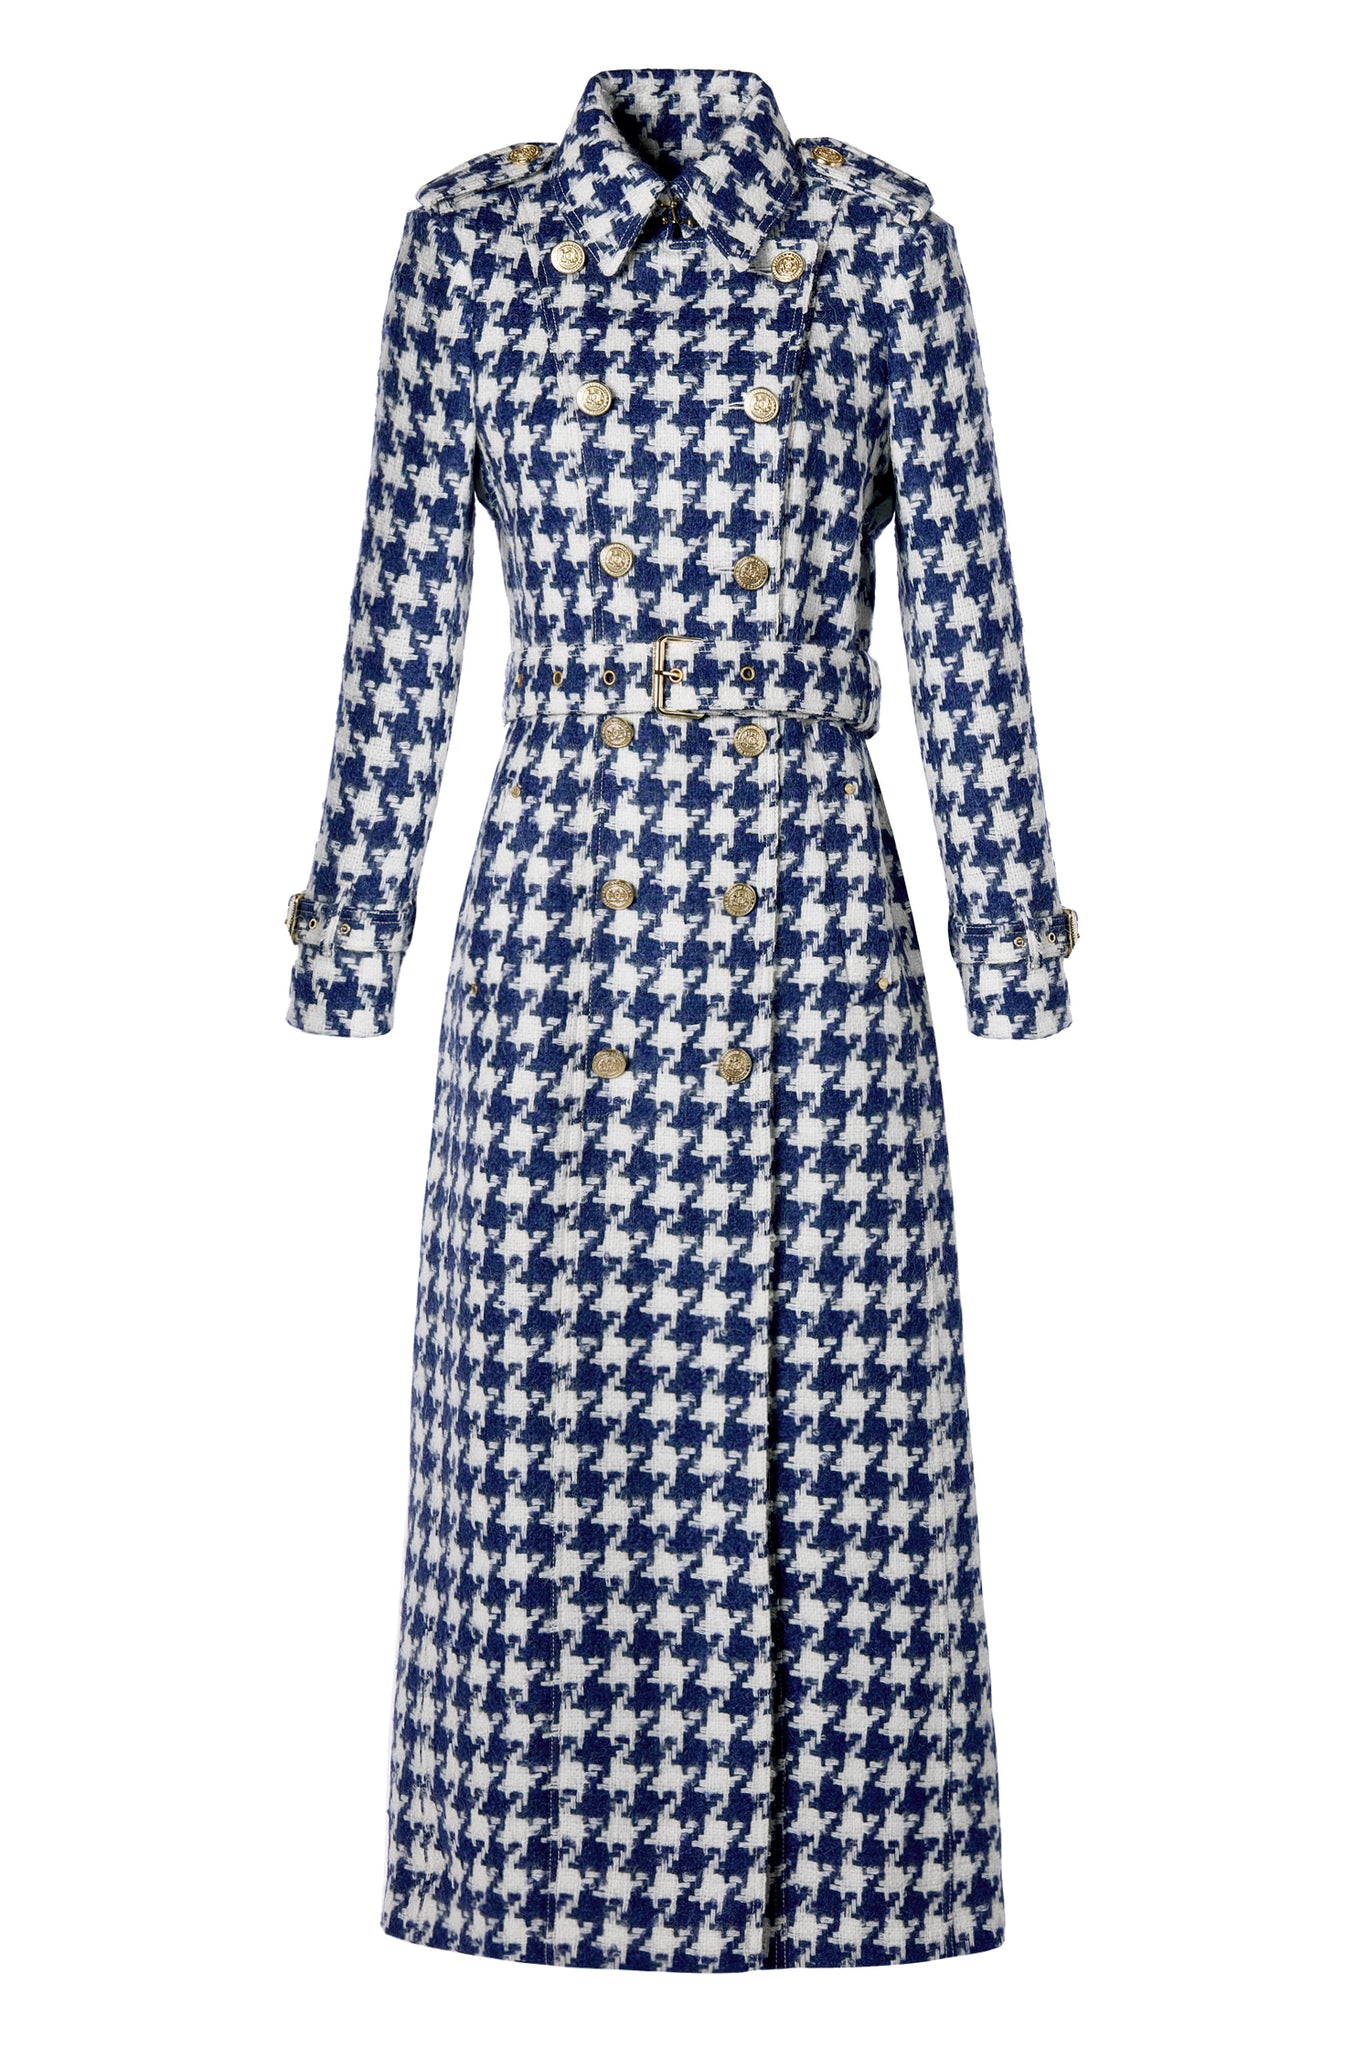 Jade's Large Scale Navy Houndstooth Look